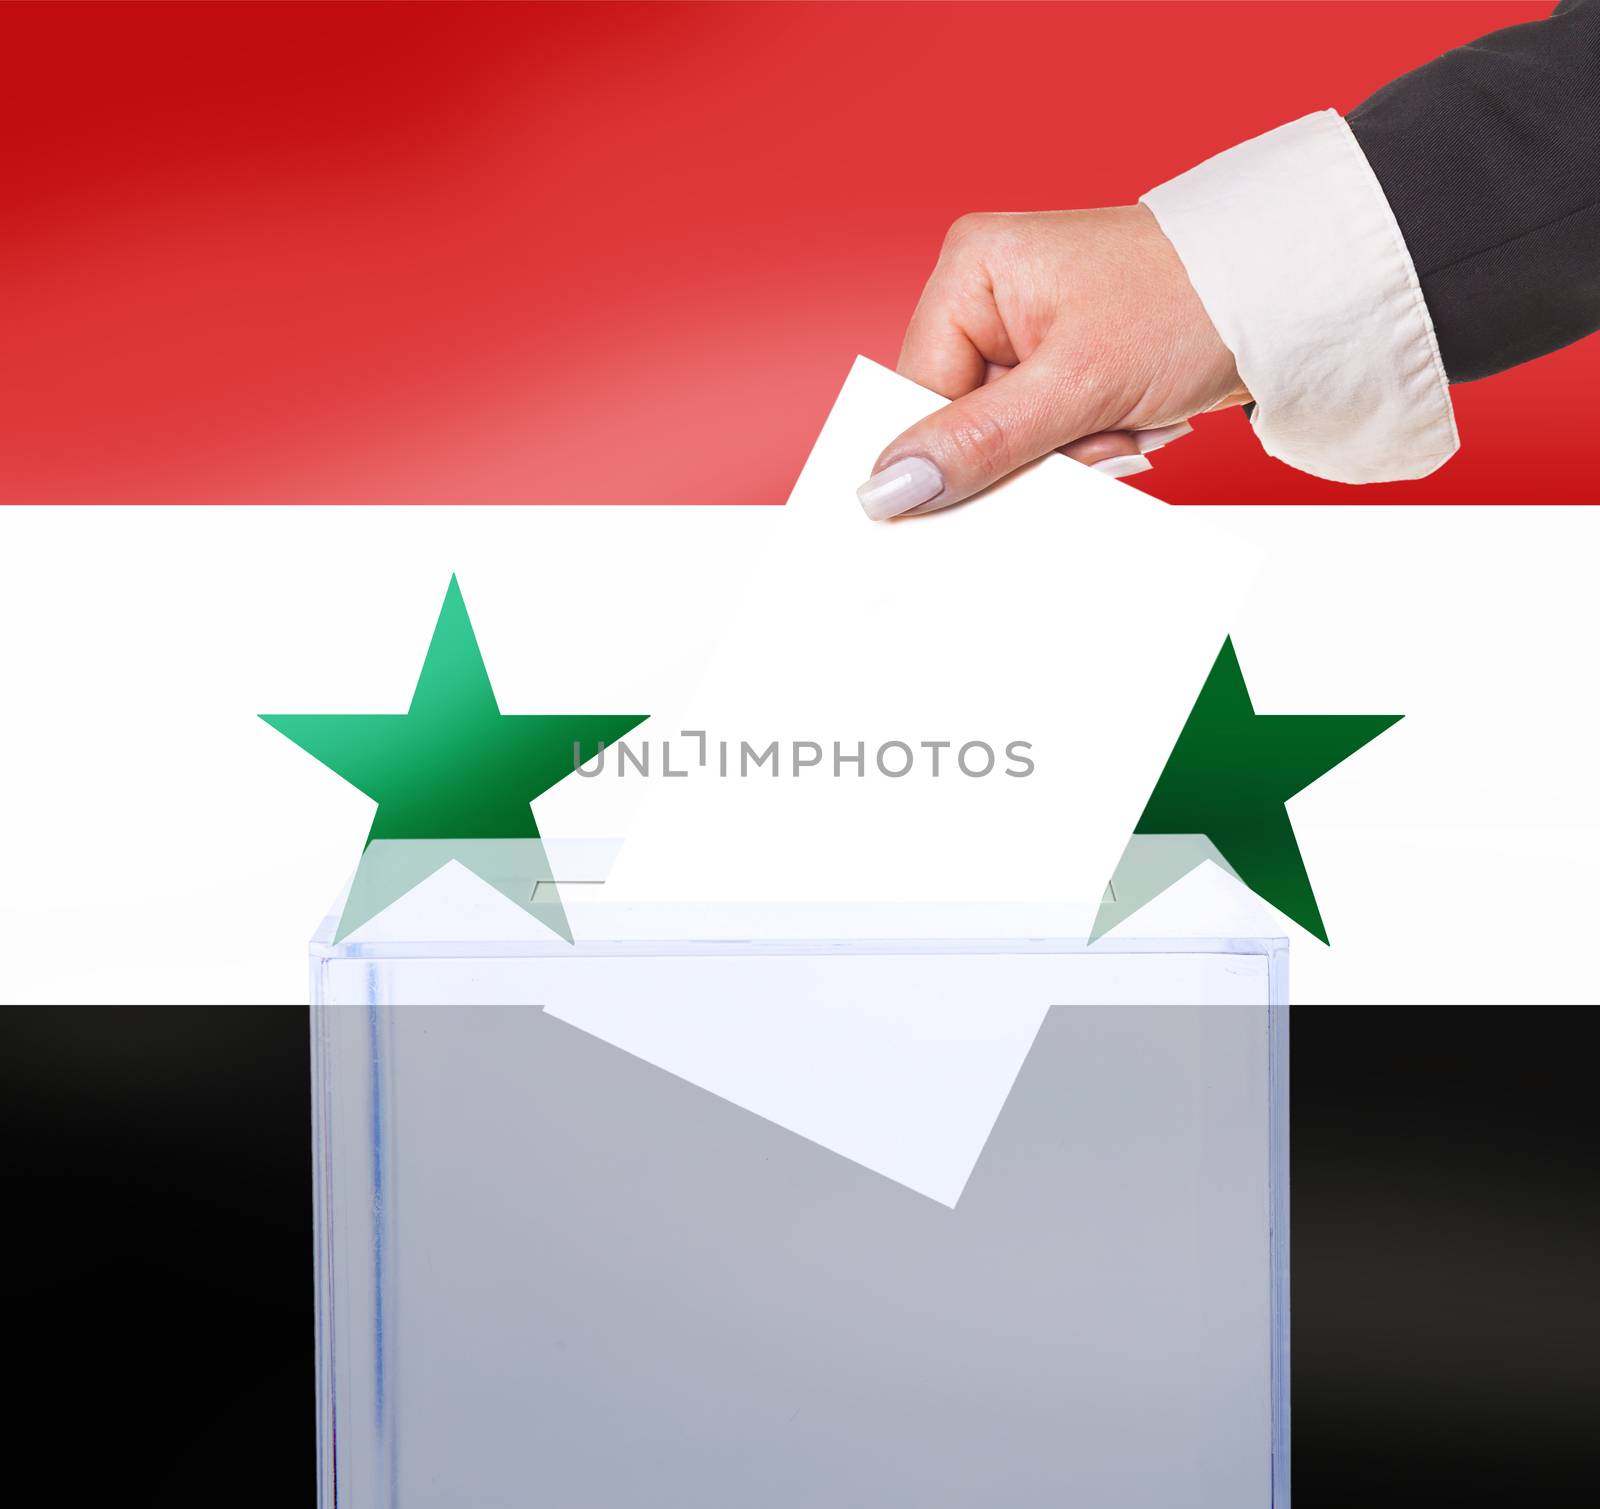 electoral vote by ballot, under the Syria flag